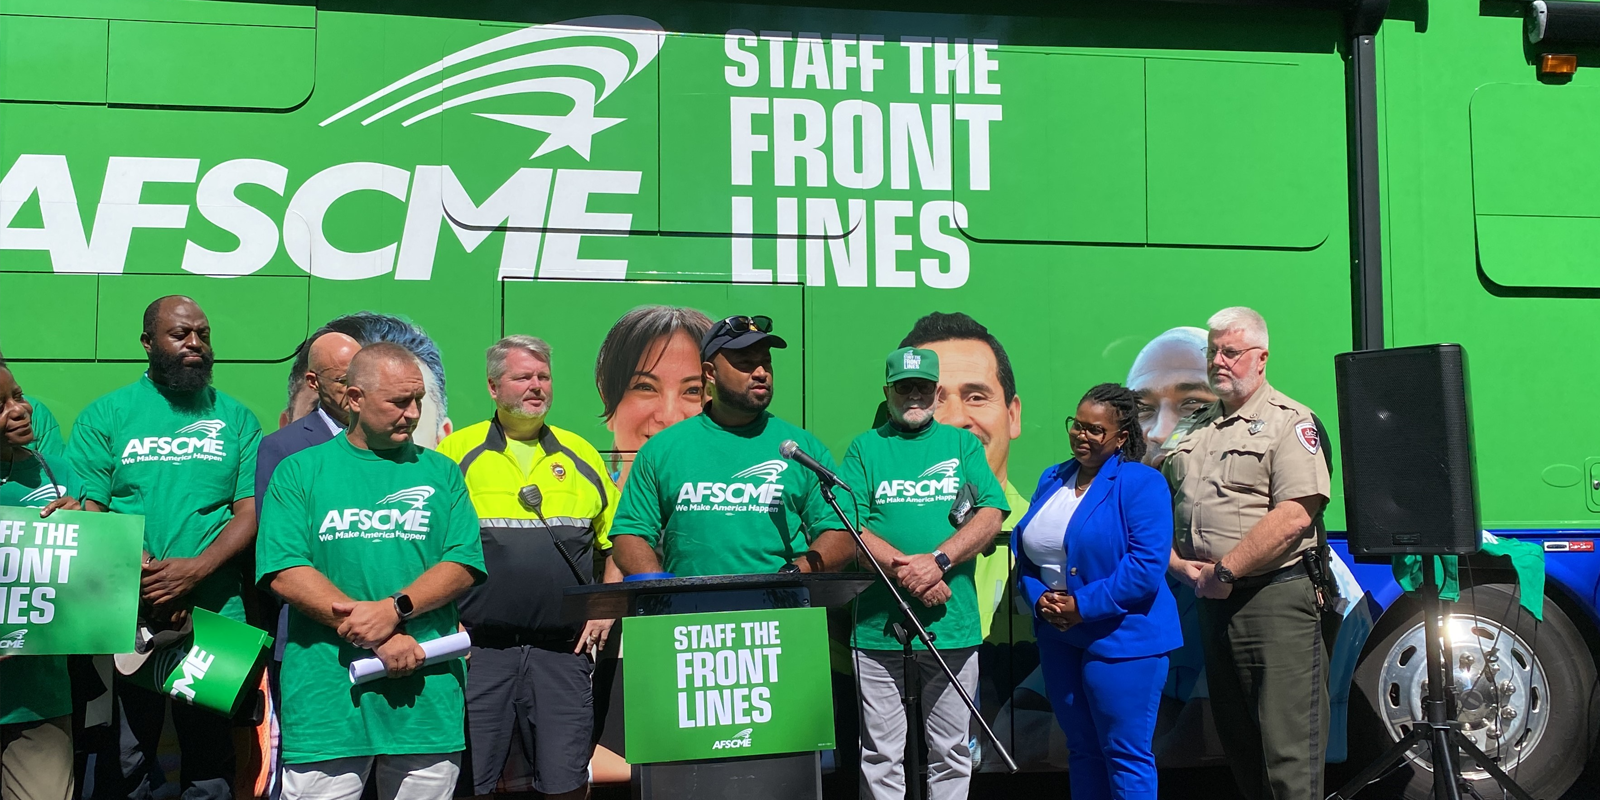 Boston is today’s stop for the Staff the Front Lines bus tour  